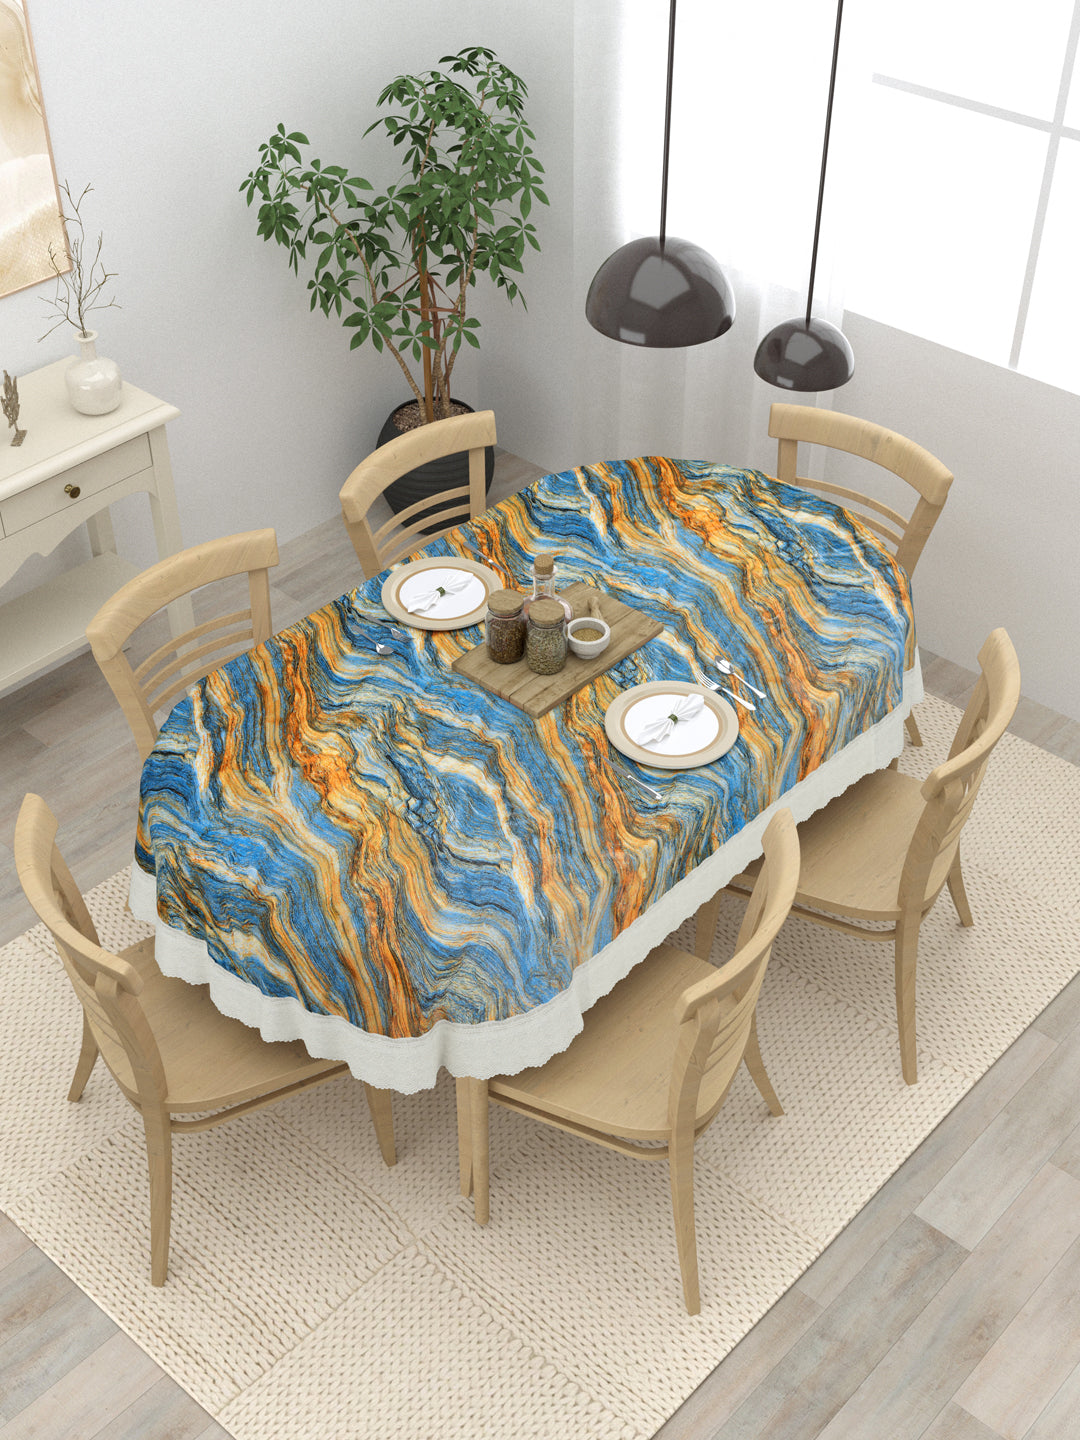 6 Seater Oval Dining Table Cover; 60x90 Inches; Material - PVC; Anti Slip; Blue & Golden Abstract